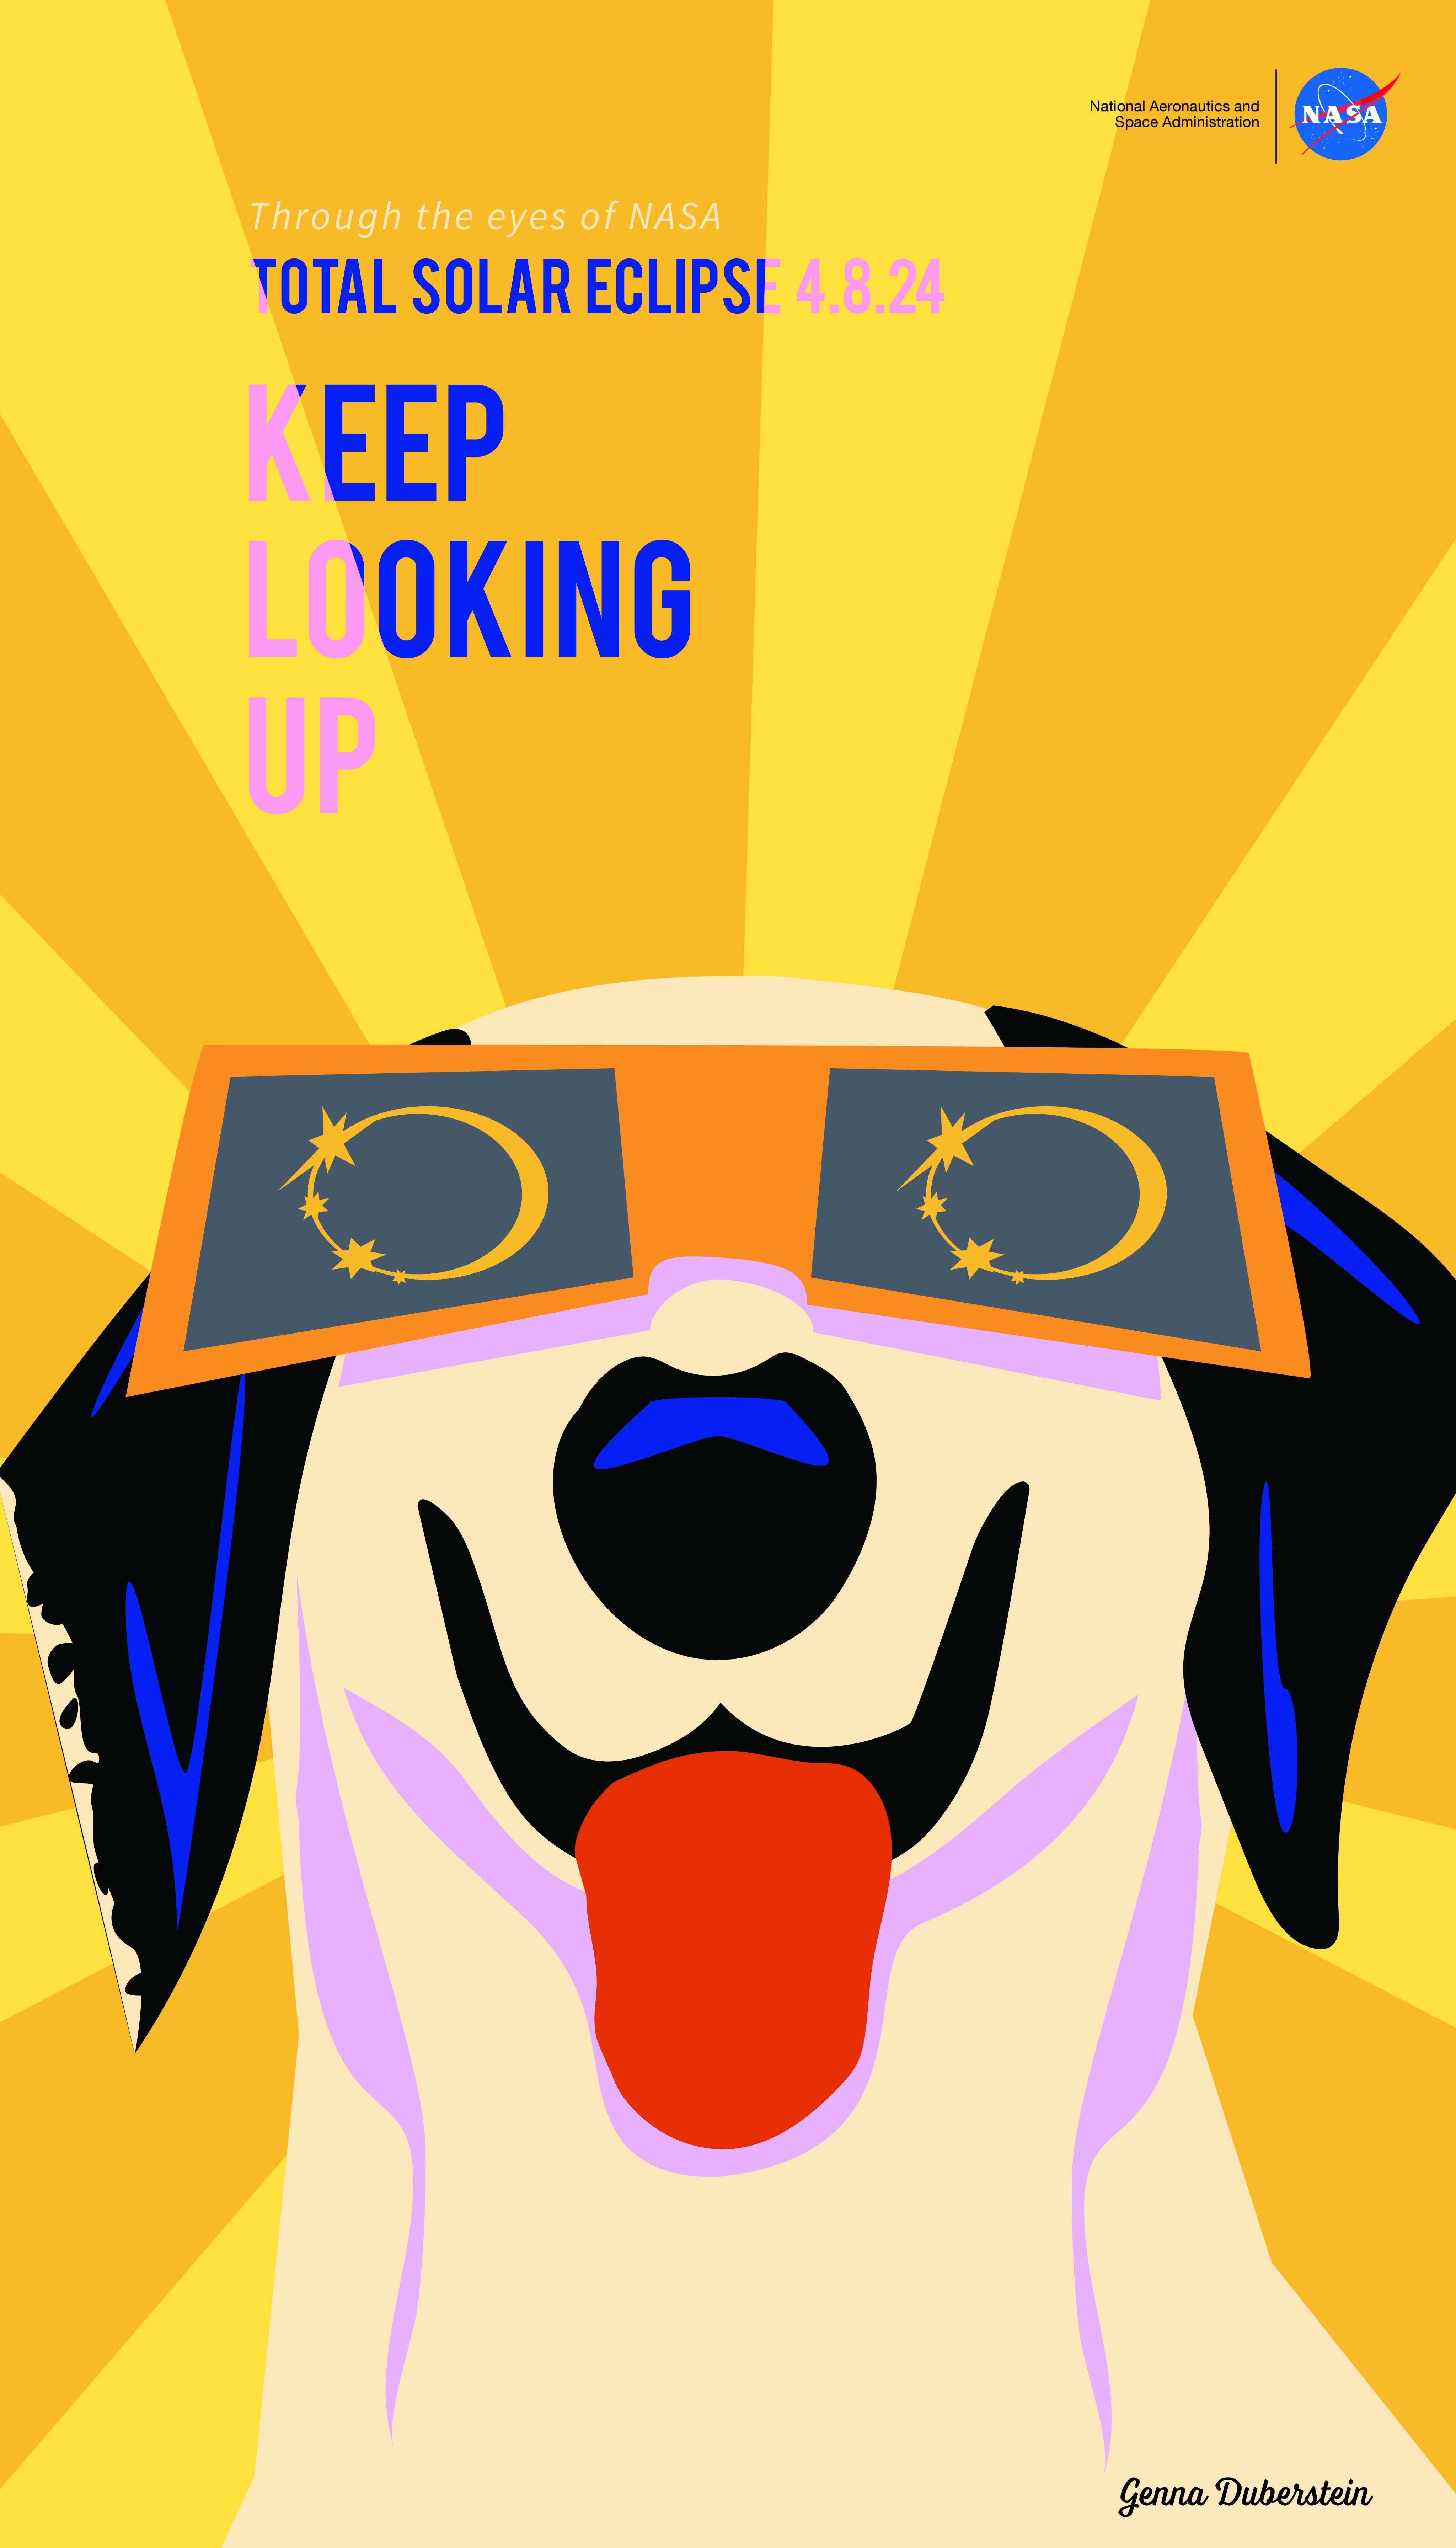 Against a background filled with orange and yellow rays, a cartoon dog looks upward. The dog is white with black ears. It is wearing orange eclipse glasses. The eclipse is reflected in the glasses. at the top, it says "Through the eyes of NASA, Total Solar Eclipse 4.8.24, Keep Looking Up." There is a NASA insignia at the top right corner. The artist's signature, Genna Duberstein, is at the bottom right corner.